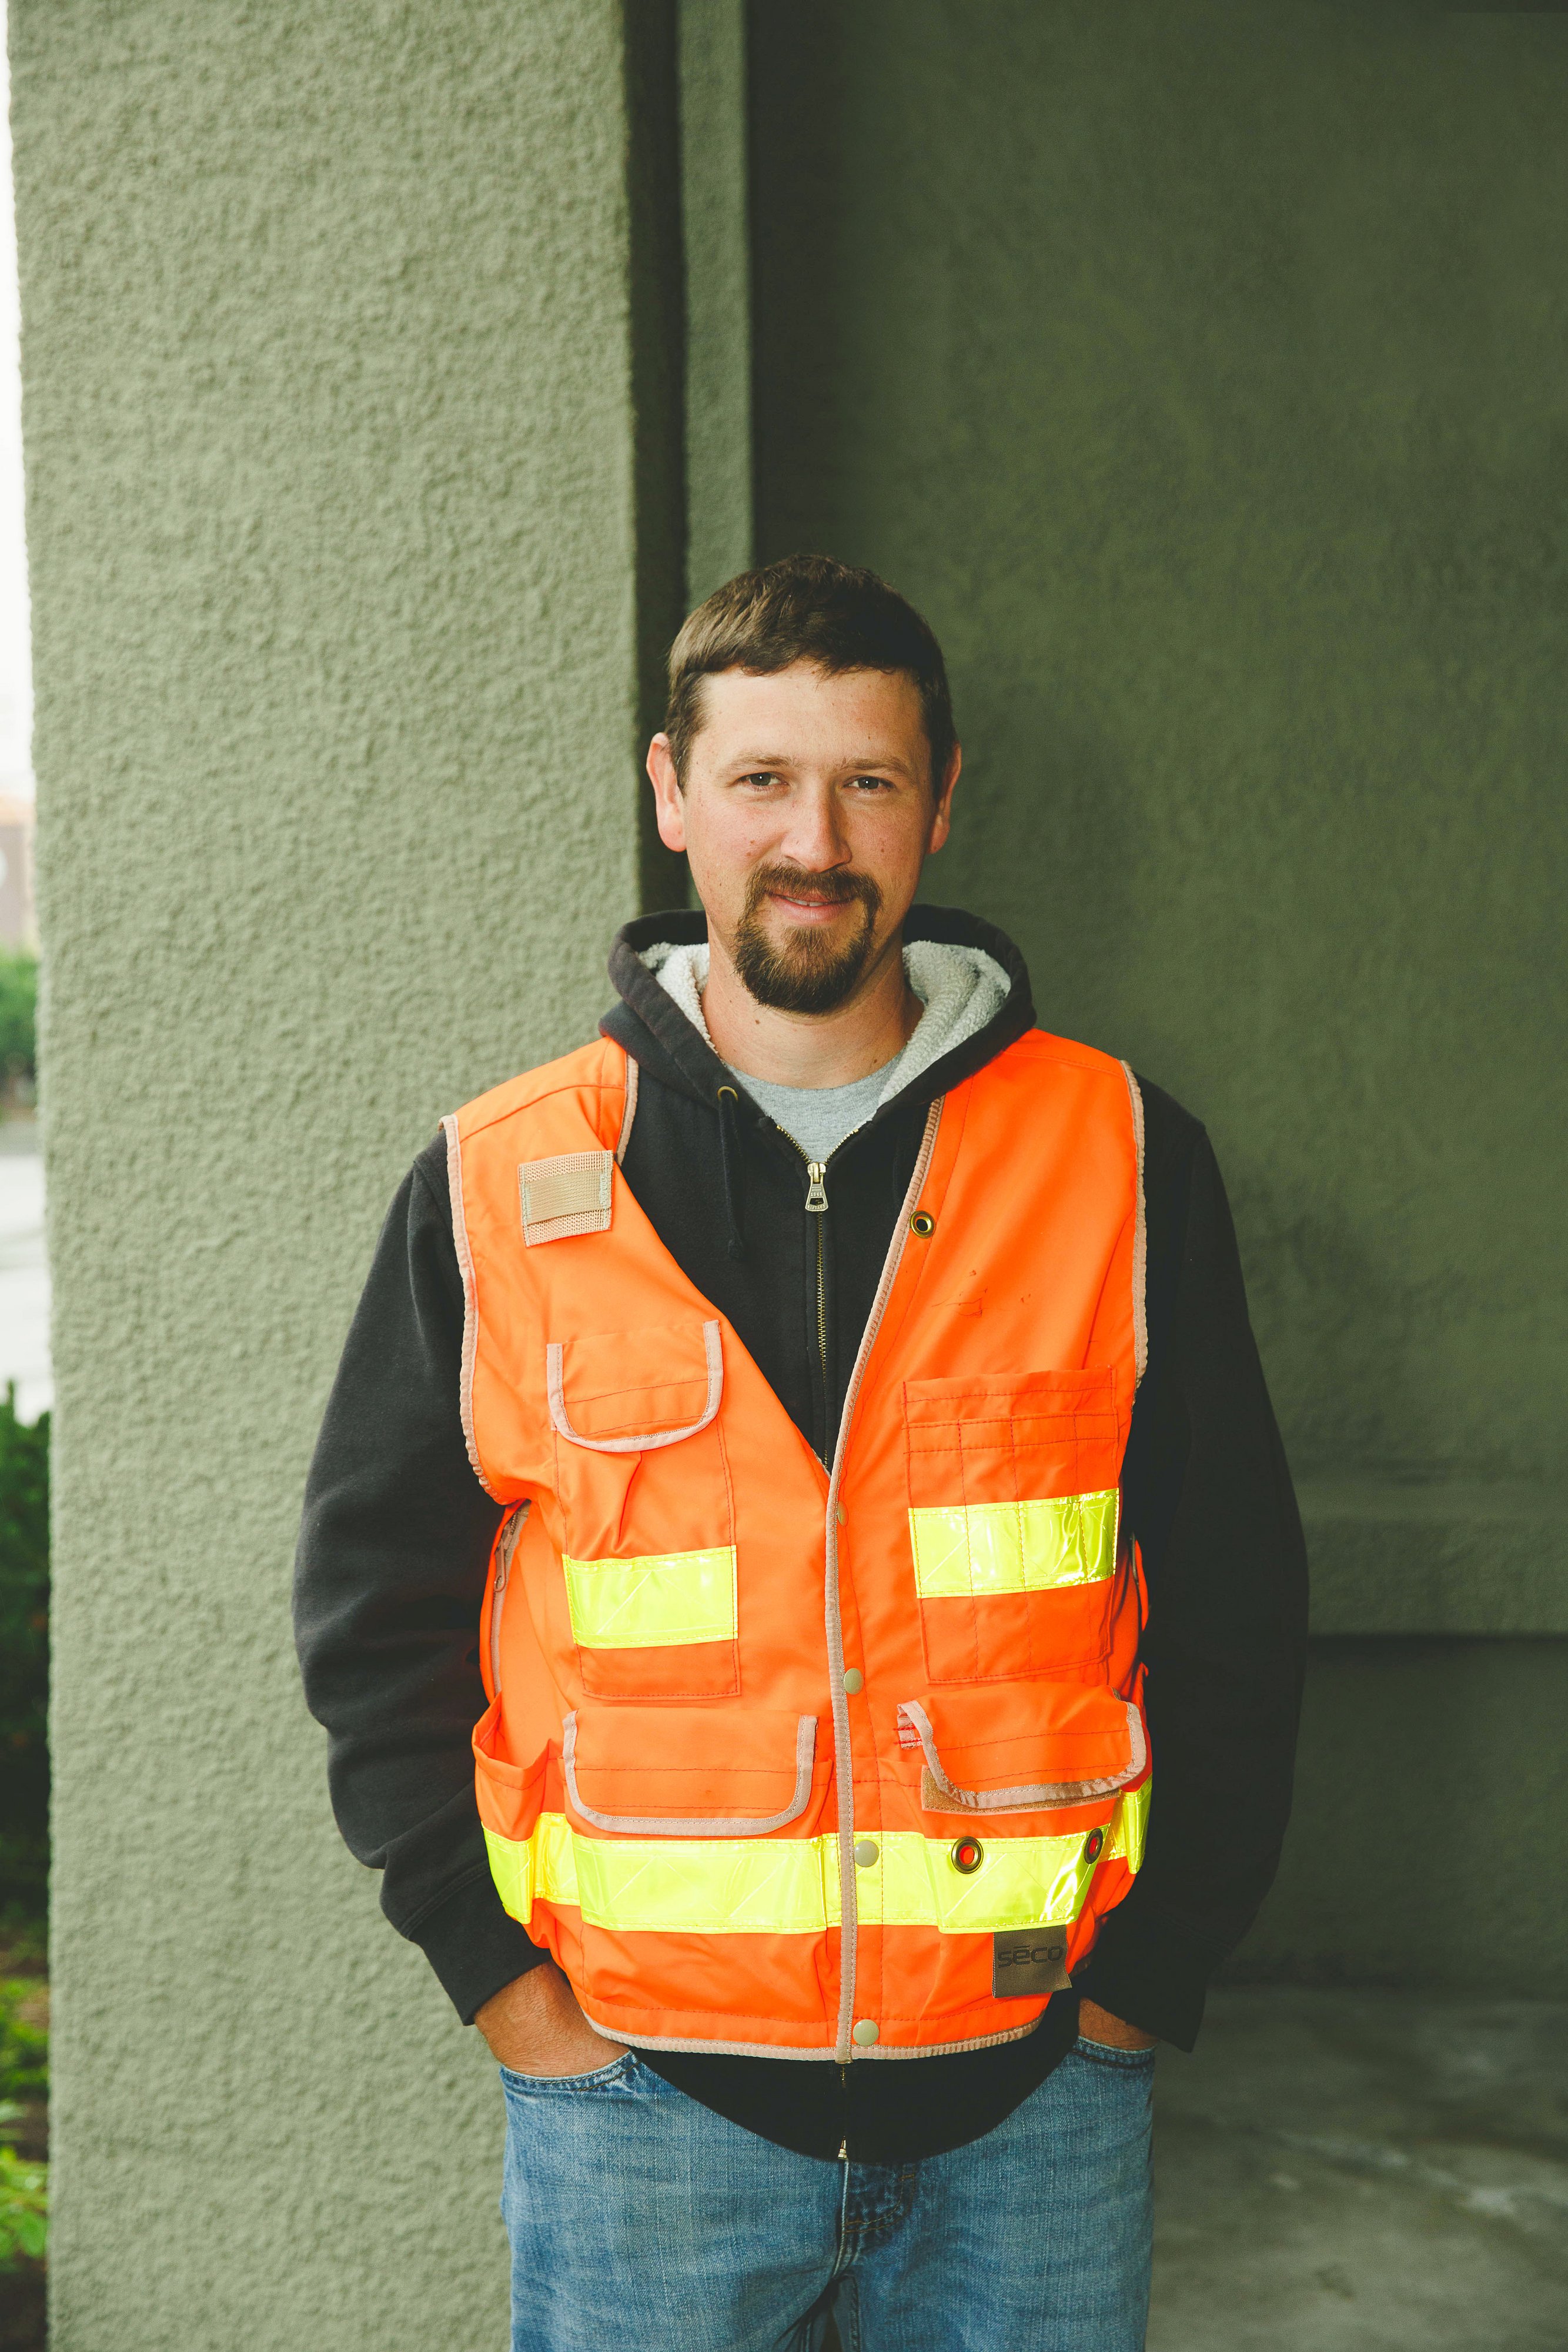 Jeremy has worked for i.e. Engineering, Inc. since 2005 and has most recently worked as both a Survey Crew Chief and Construction Observer. The majority of this time has been spent in the field surveying on numerous construction projects and also providing a key link between construction activities and the Project Engineer and Design Team. 